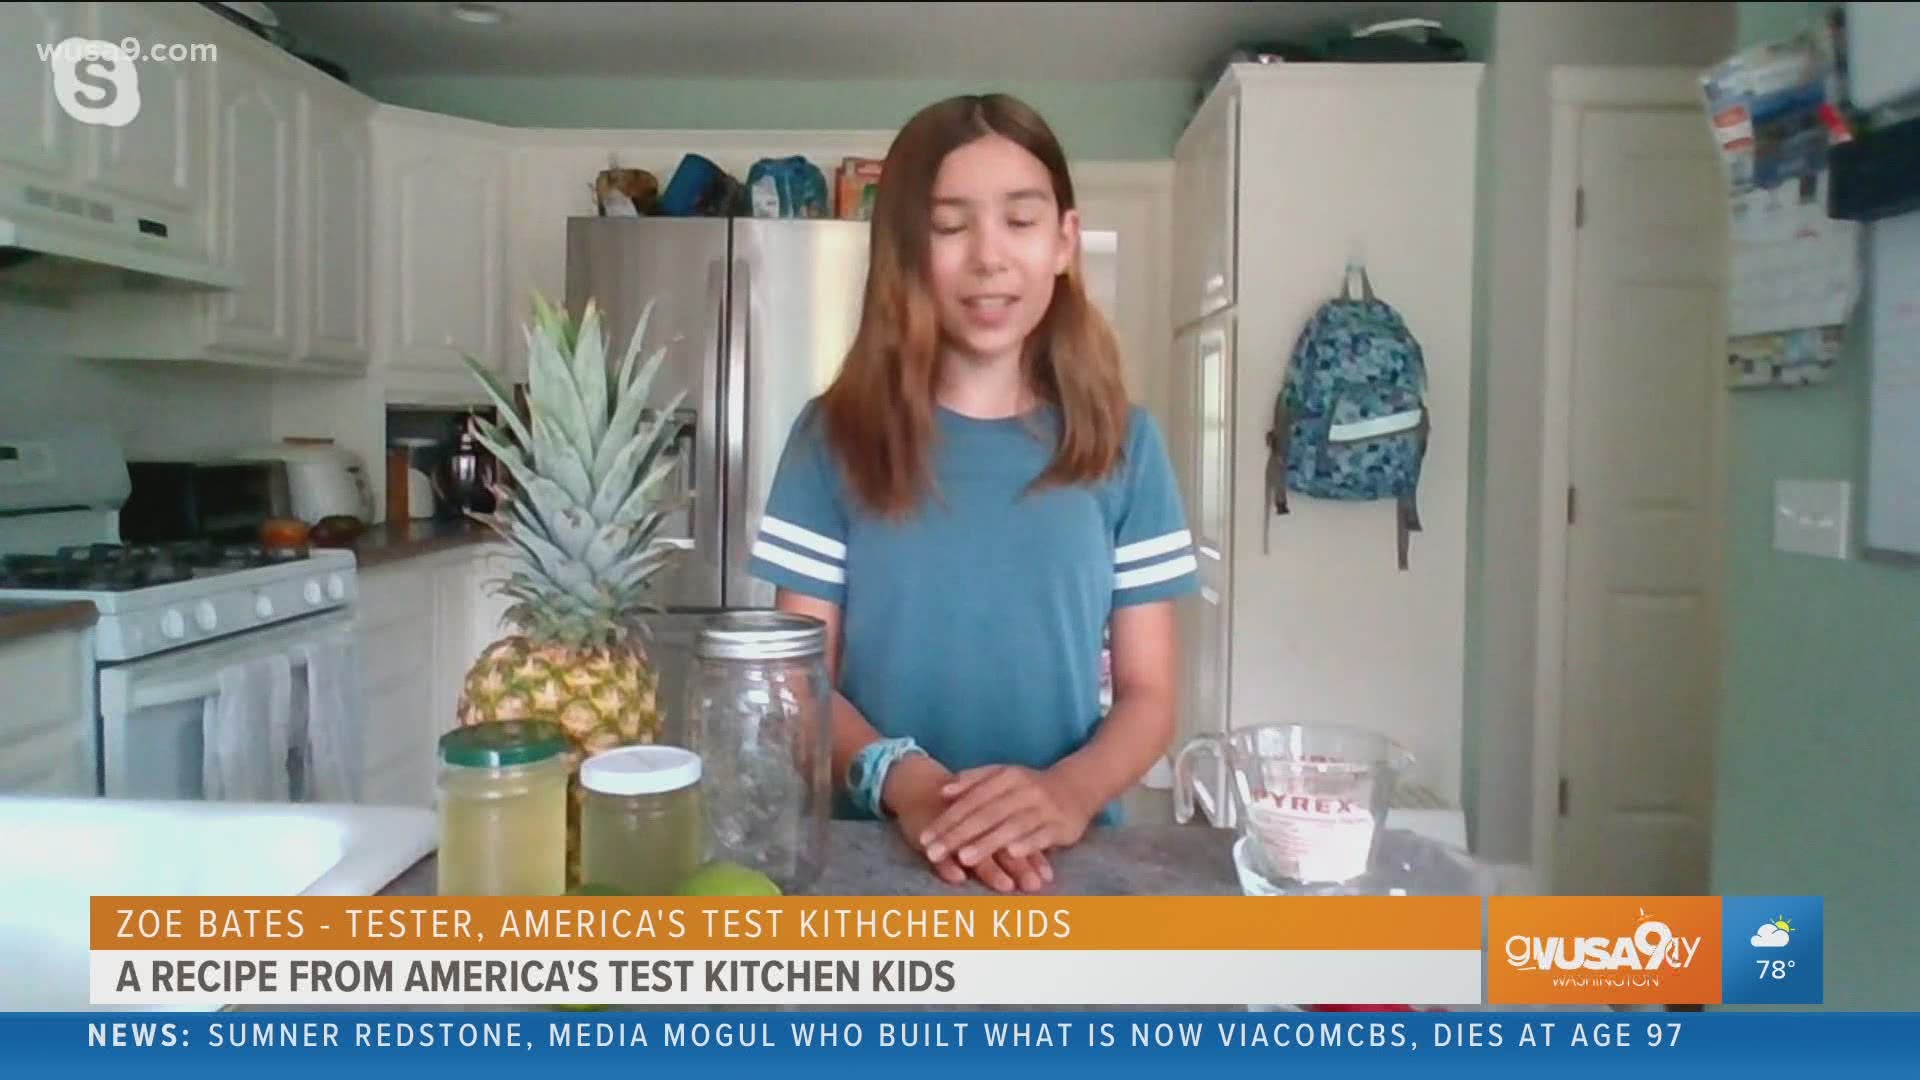 Zoe Bates, one of America's Test Kitchen Kids shares a cool refreshing summer recipe.